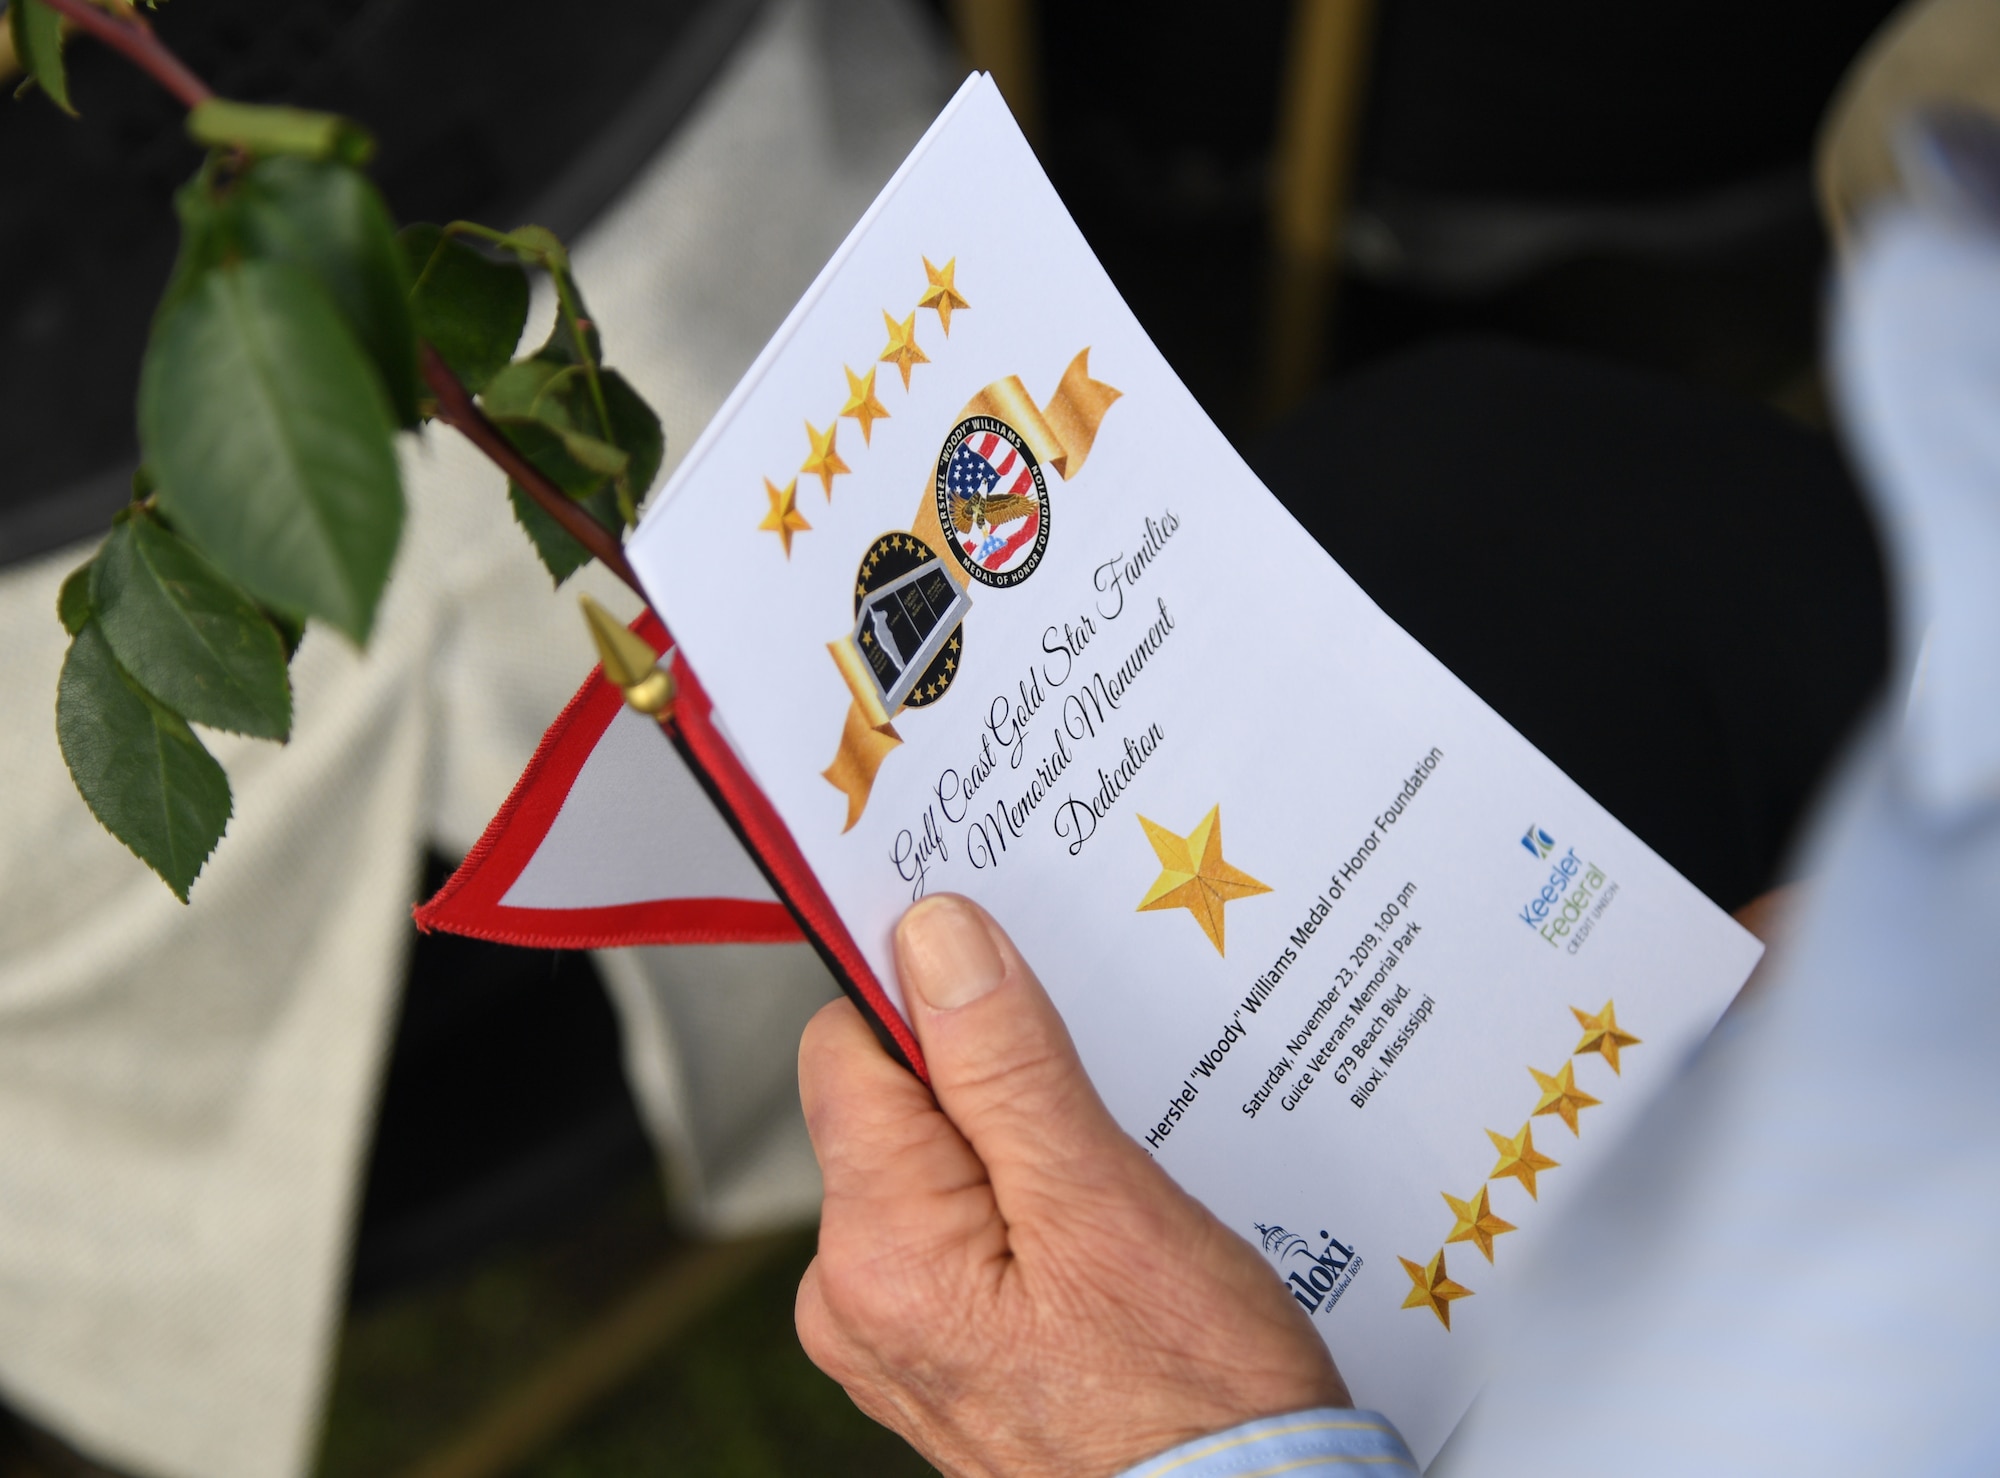 Ashton Belcher, Gold Star family member, holds an event program during the Gold Star Families Memorial Monument dedication ceremony at Guice Veterans Memorial Park in Biloxi, Mississippi, Nov. 23, 2019. The monument honors families of service men and women who sacrificed their lives while serving in the military. (U.S. Air Force photo by Kemberly Groue)